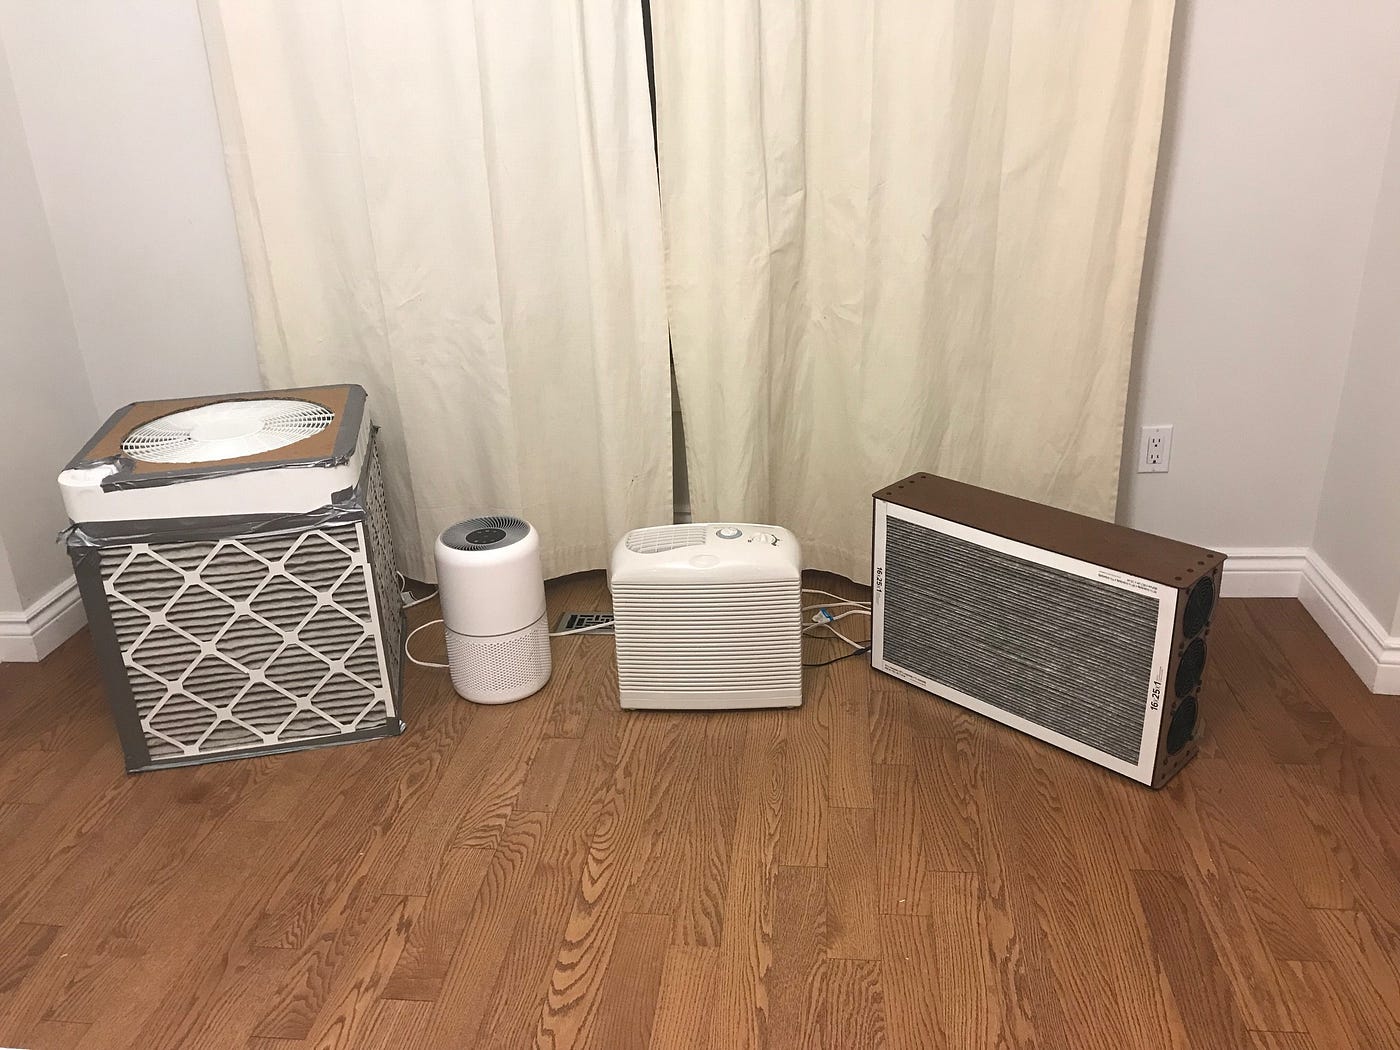 Box Fan CR Box, PC Fan CR Box or HEPA Filter. Which one is right for you? |  by Joey Fox | It's Airborne